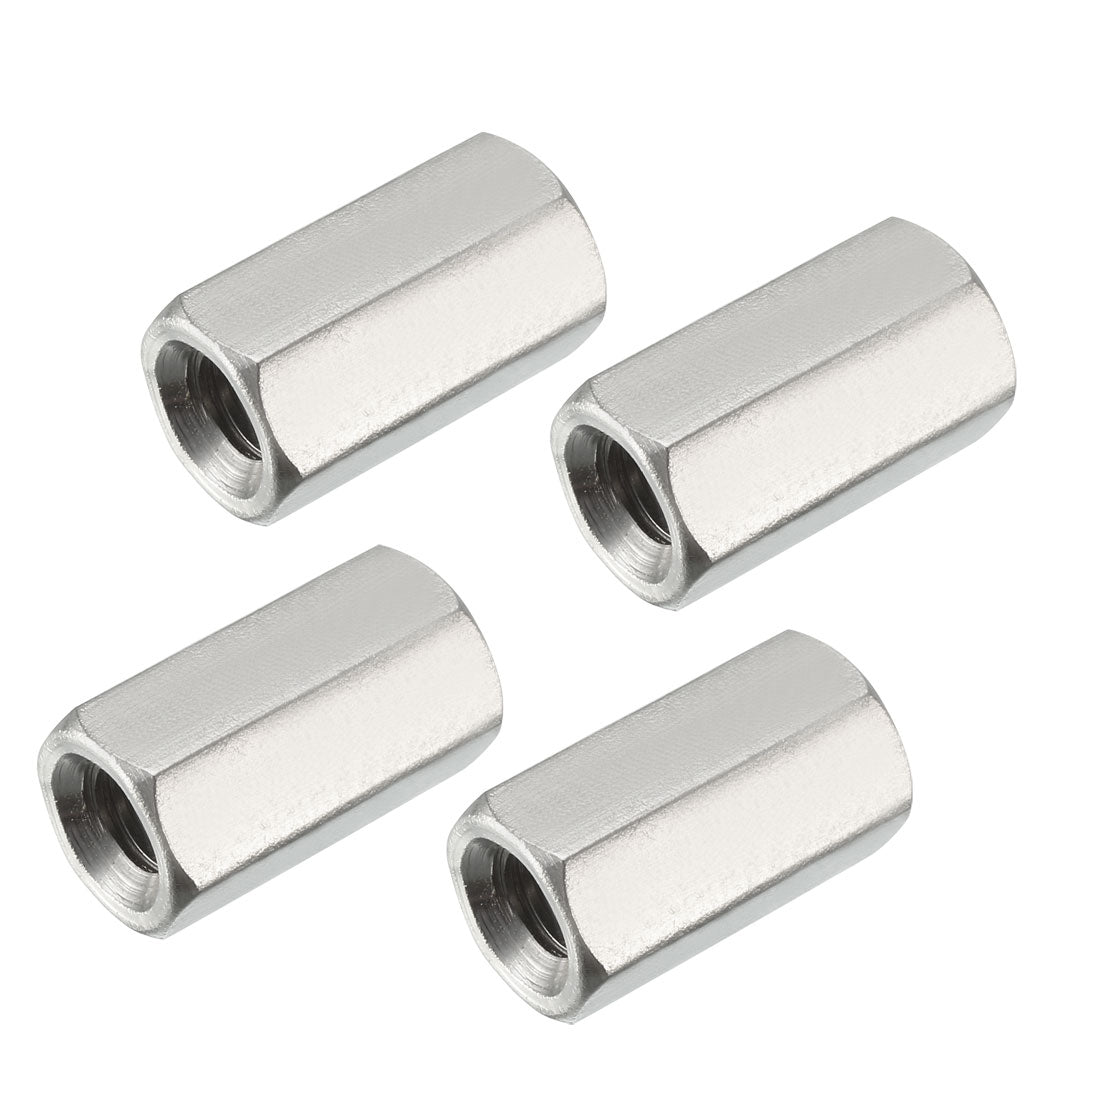 uxcell Uxcell 304 Stainless Steel Metric Hex Coupling Nut